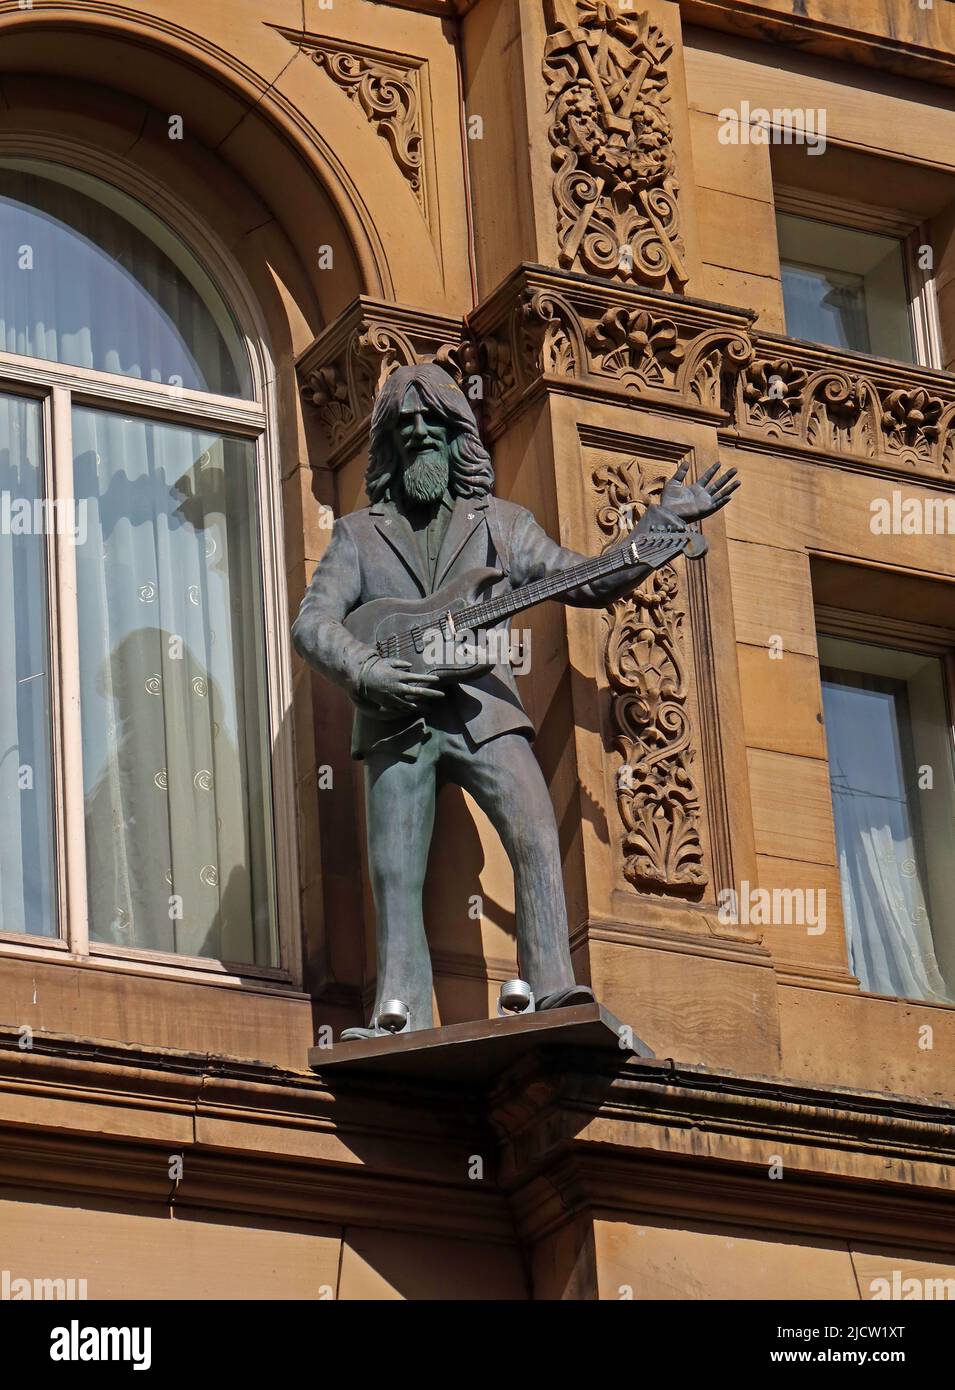 George Harrison -The Liverpool Beatle statues - The Fab Four, around outside of Hard Day's Night Hotel, Central Buildings, N John St, Liverpool L2 6RR Stock Photo